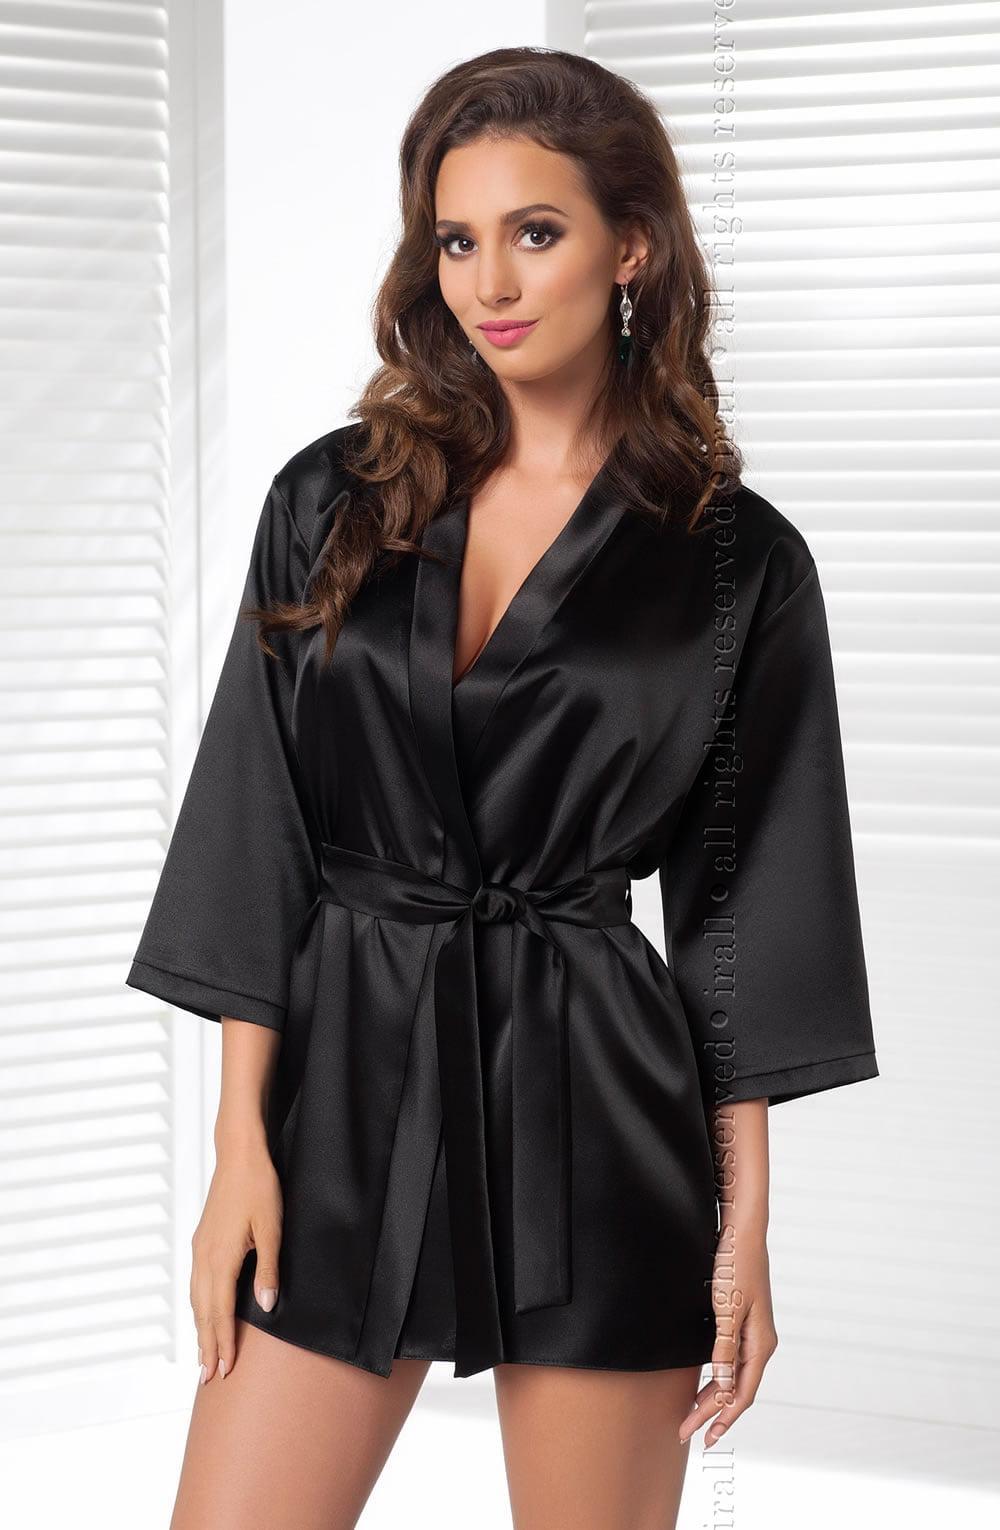 Irall Aria Dressing Gown Black-Katys Boutique